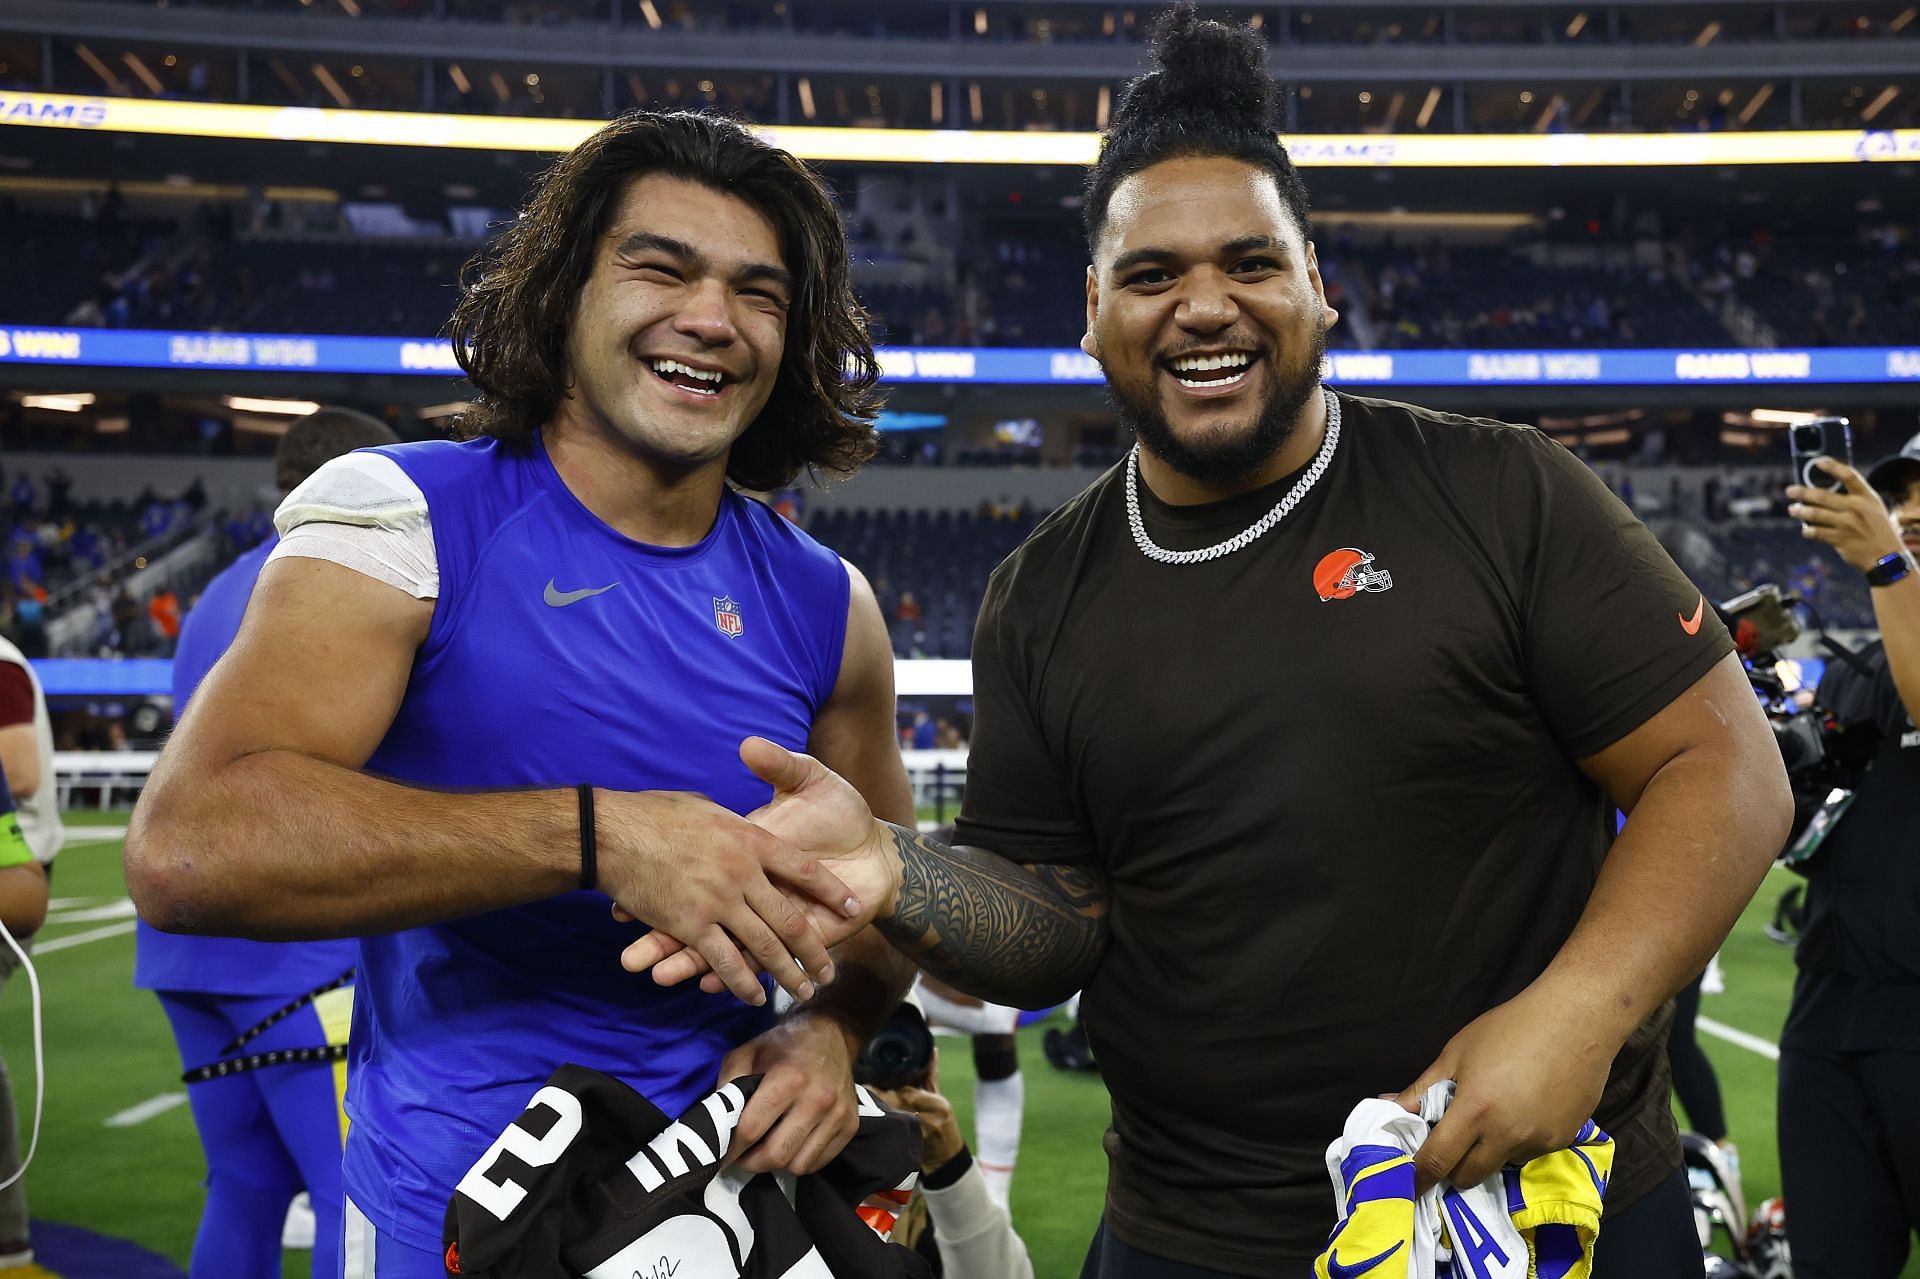 Puka Nacua after the Cleveland Browns vs. Los Angeles Rams